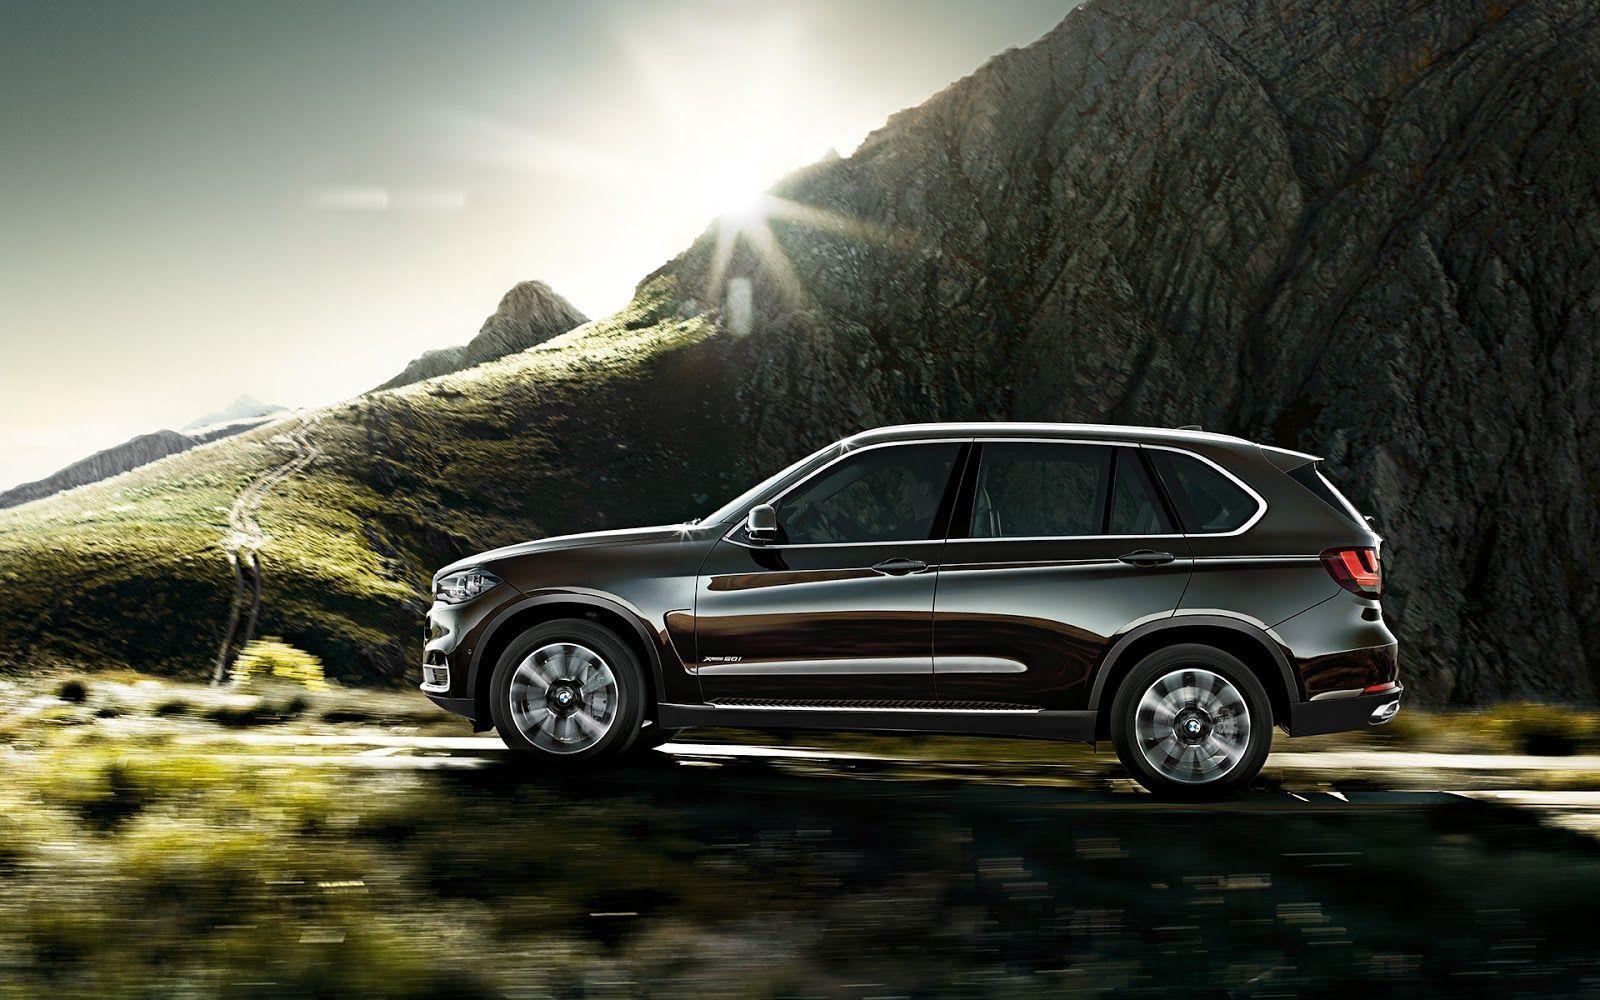 F15 2014 BMW X5 Wallpaper and Video. Town Country BMW